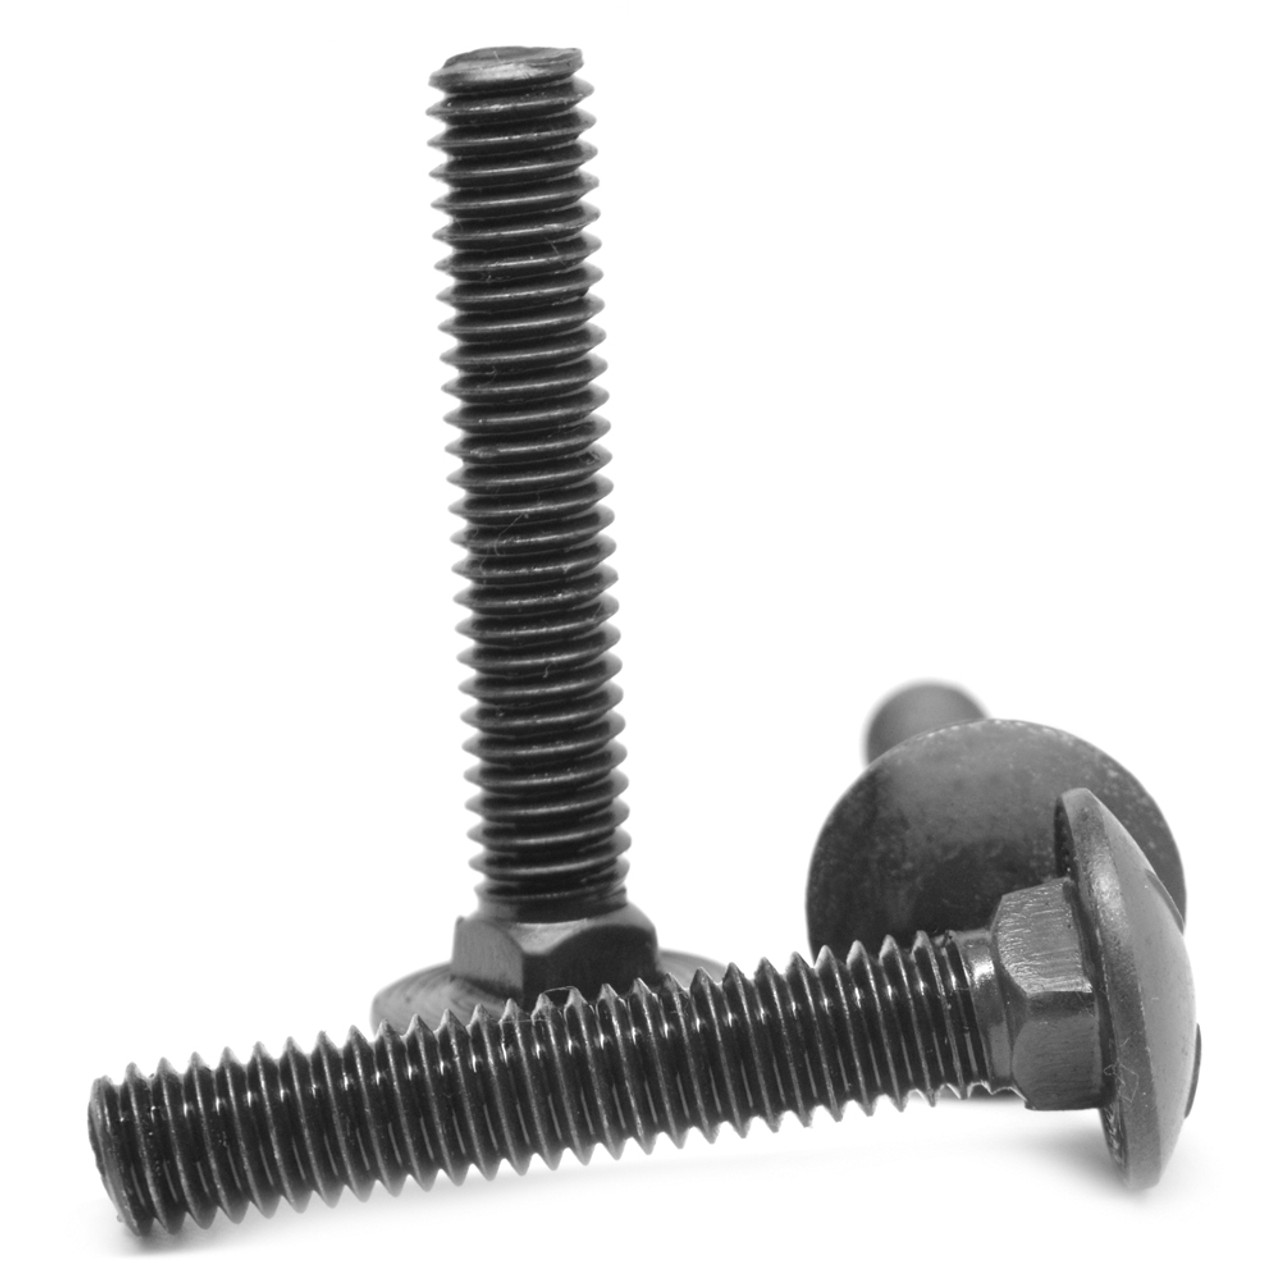 5/16-18 x 5 Coarse Thread Carriage Bolt Low Carbon Steel Black Oxide